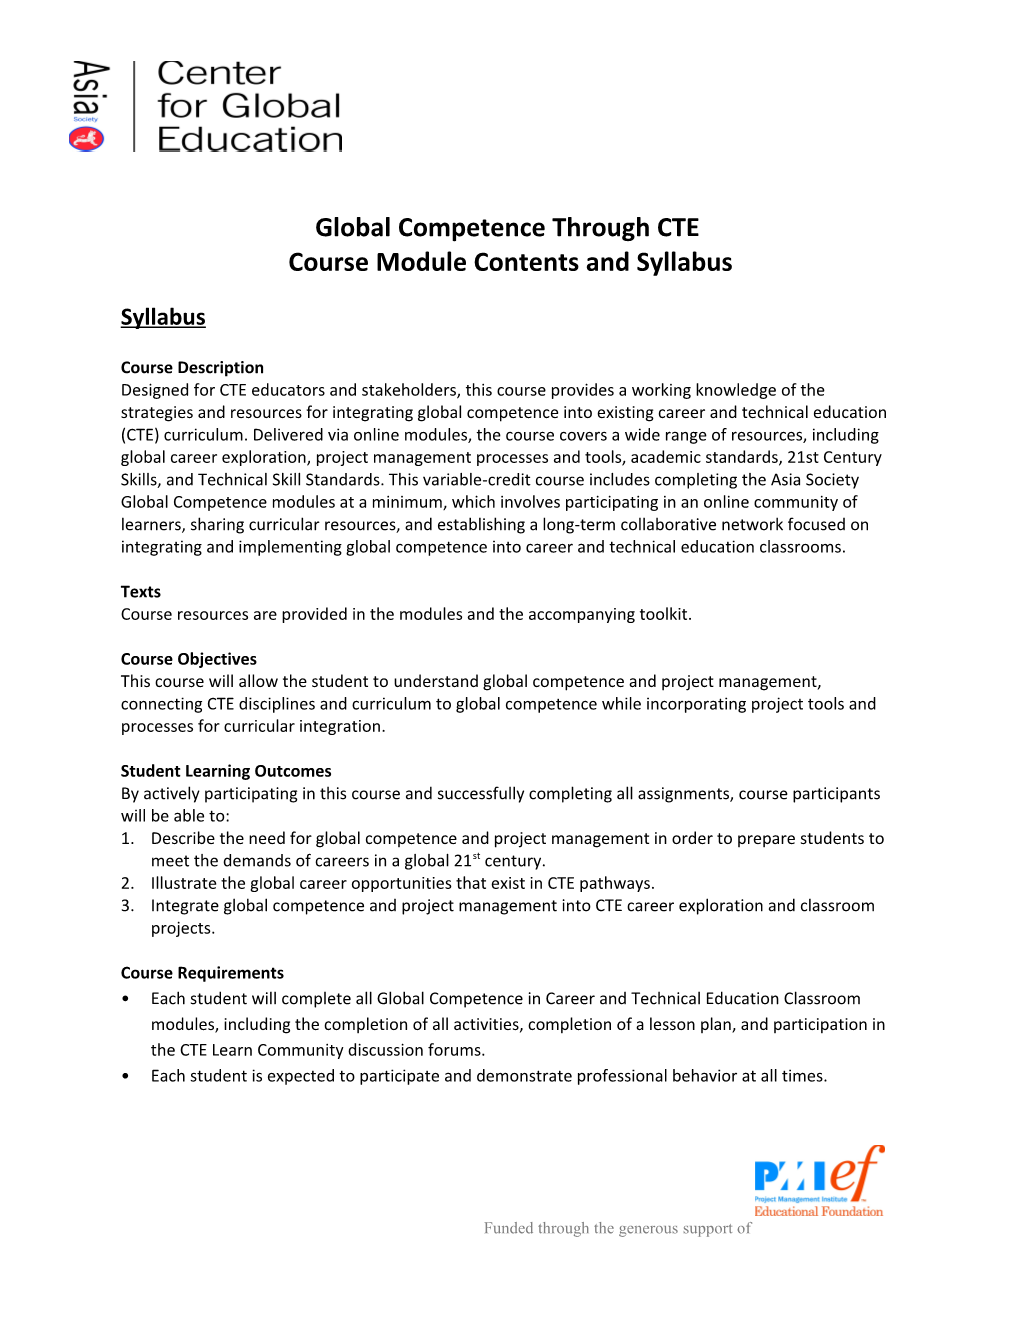 Global Competence Through CTE